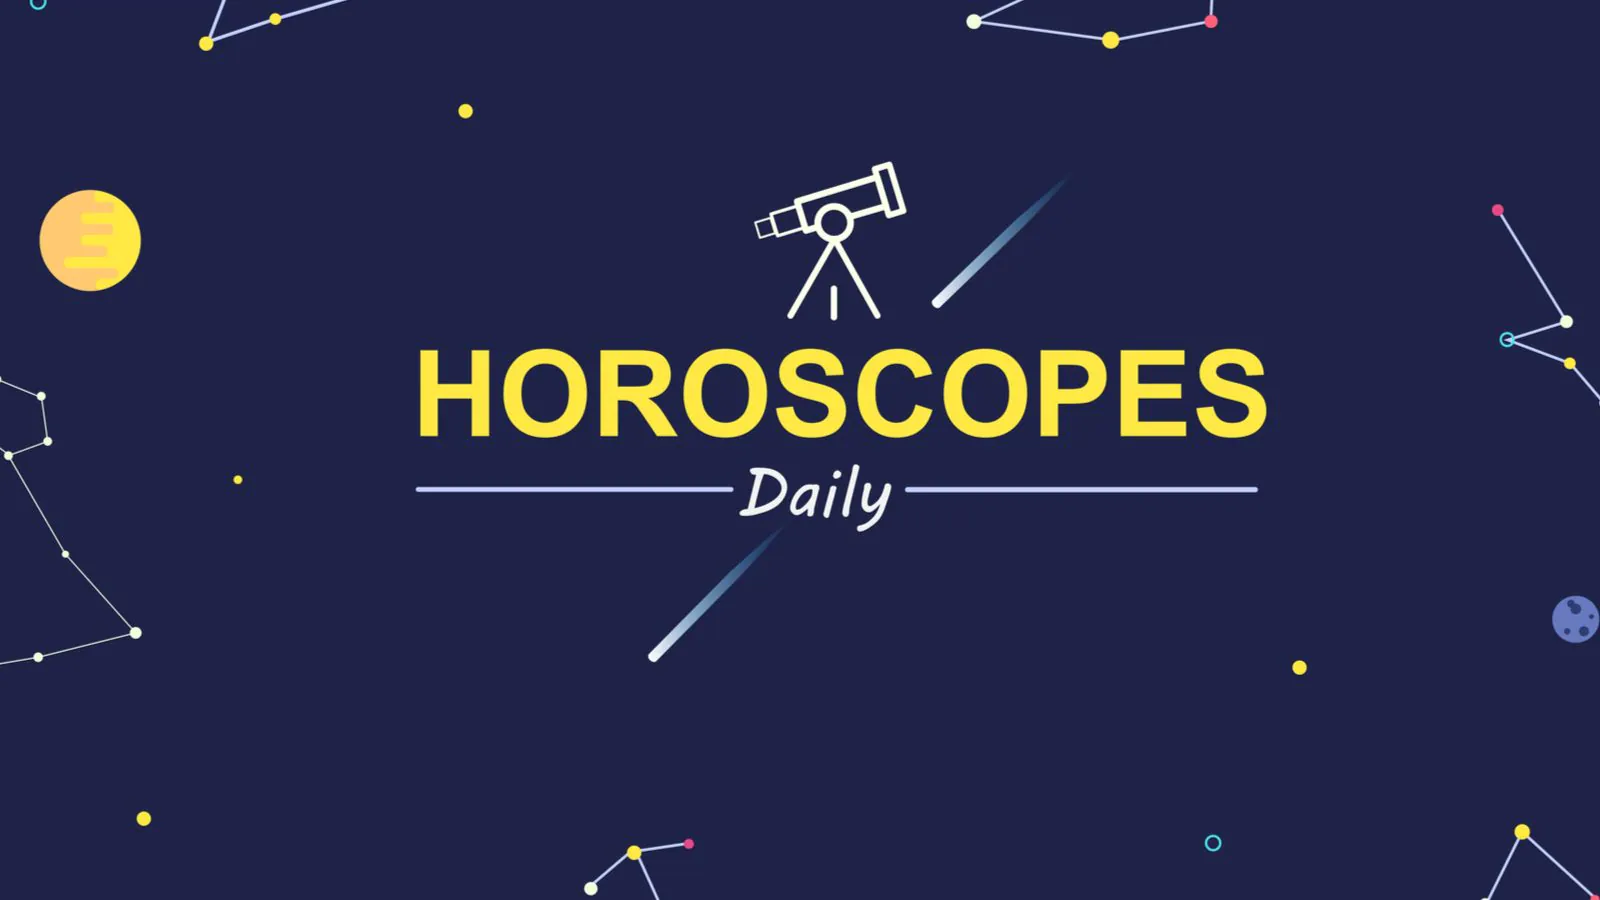 Check Out Daily Astrological Prediction for Aries, Taurus, Libra, Sagittarius And Other Zodiac Signs for Friday